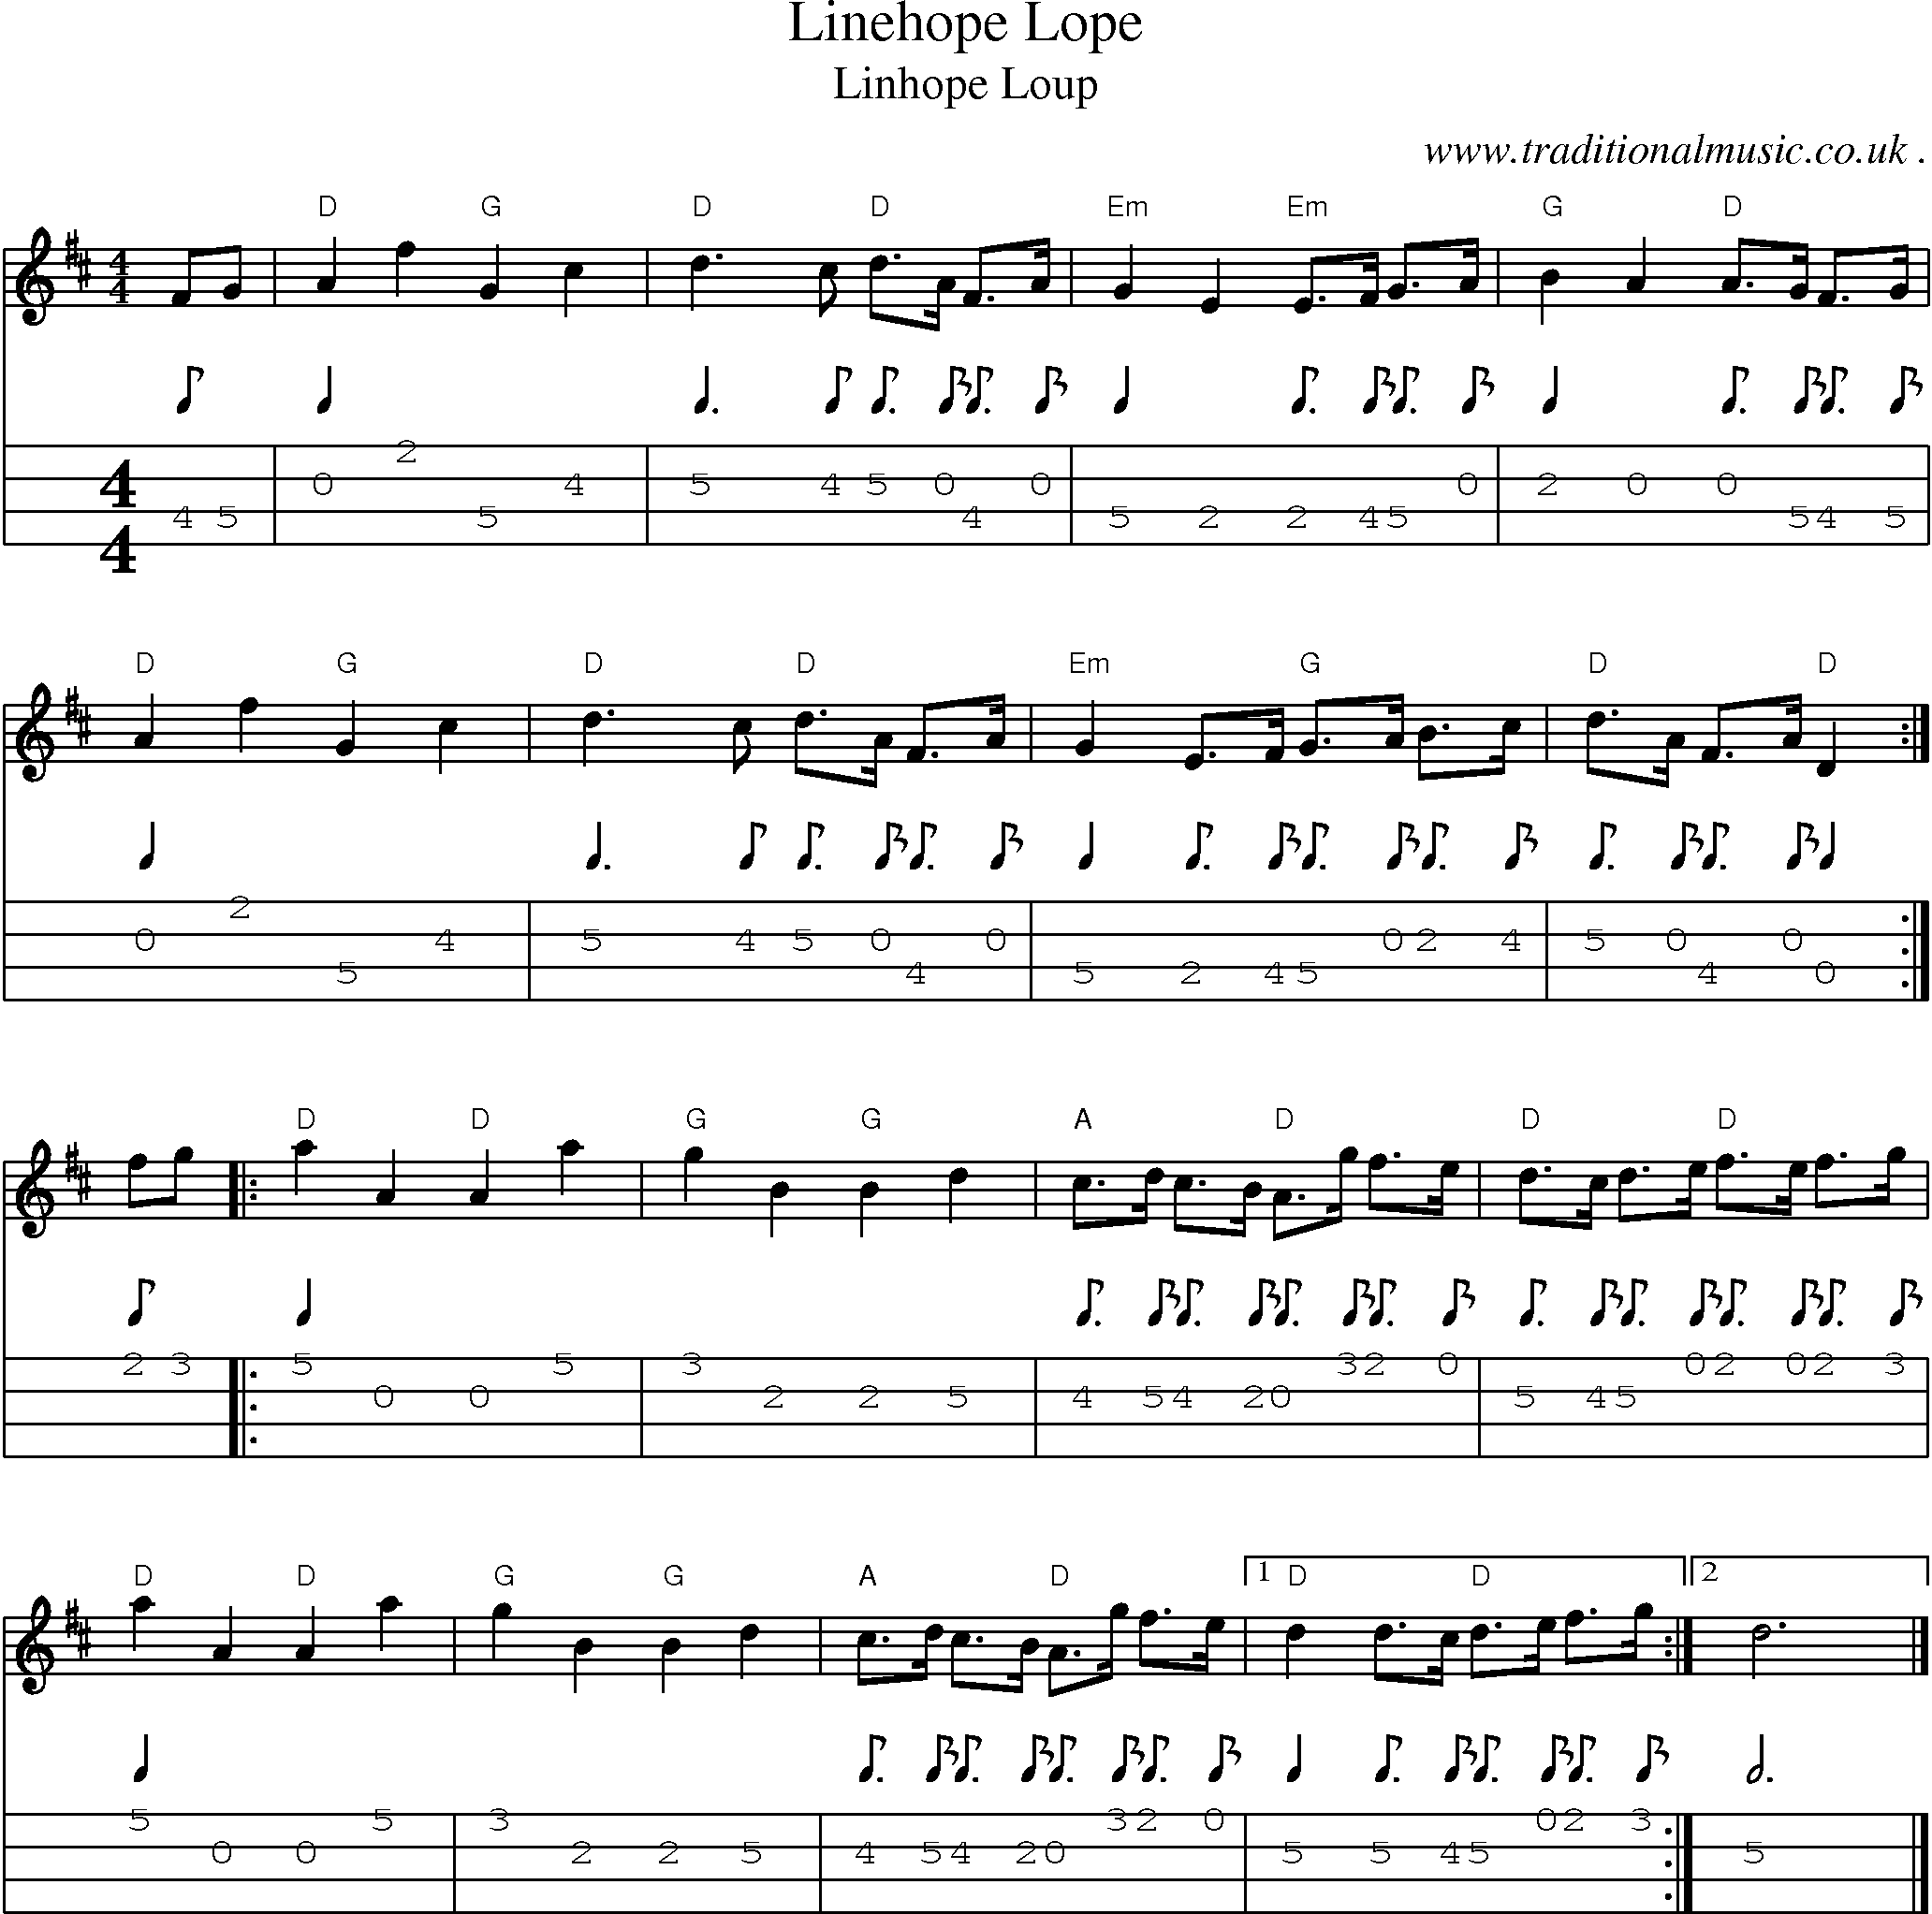 Music Score and Guitar Tabs for Linehope Lope